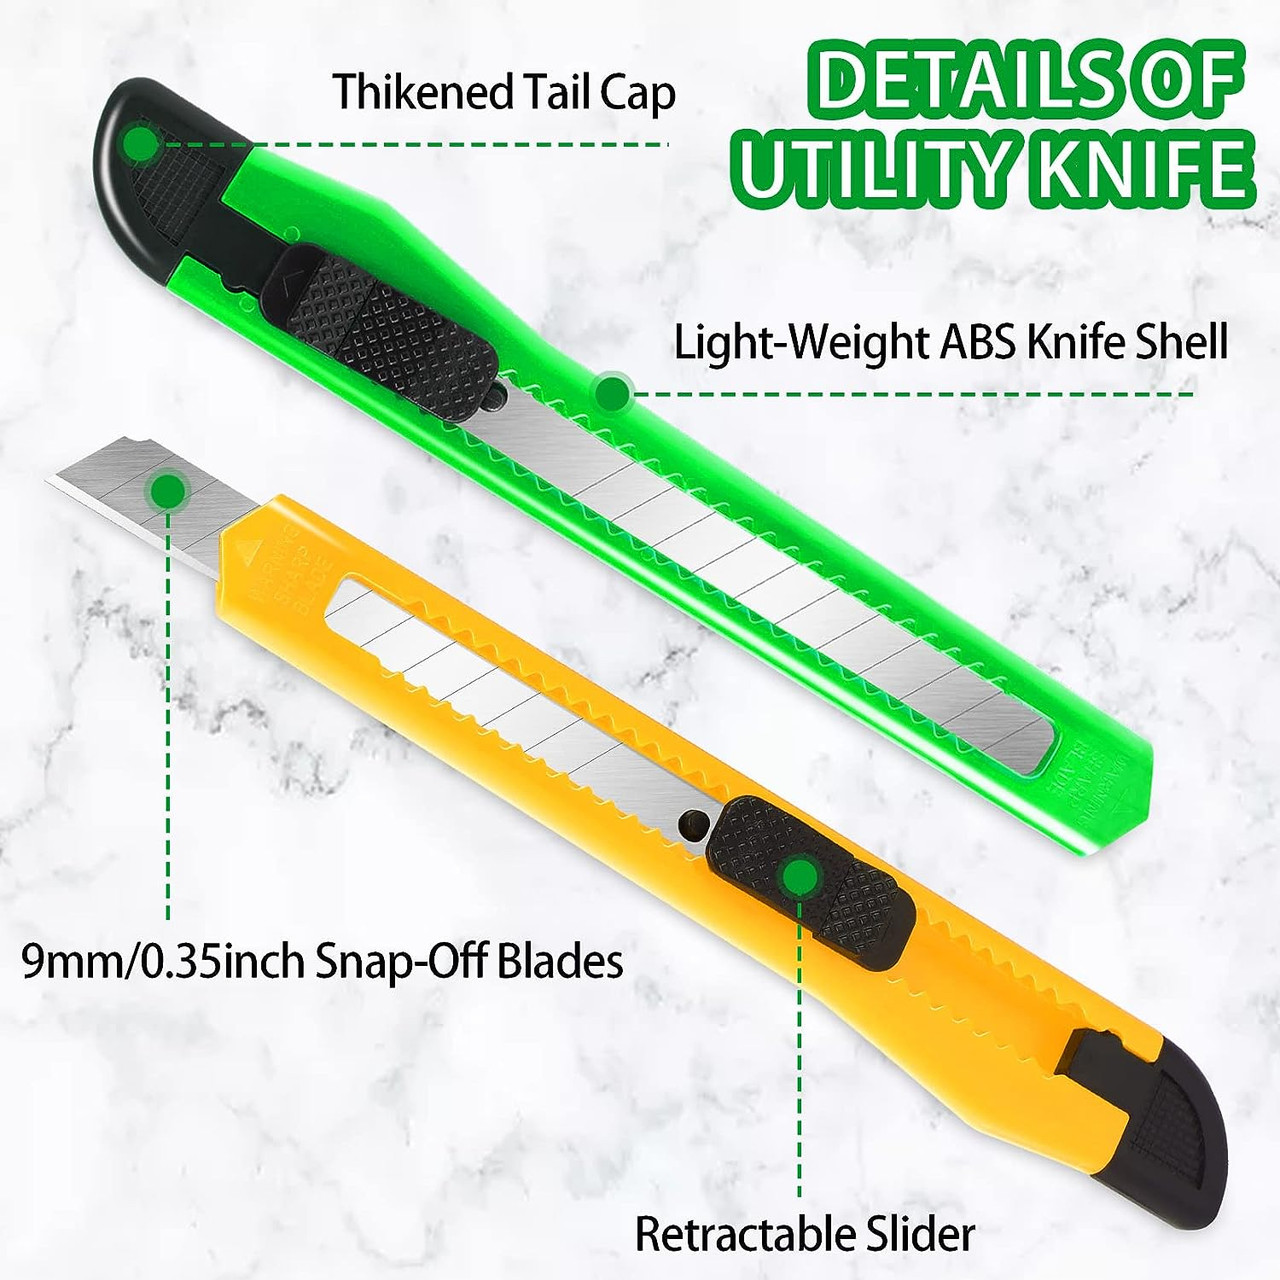 RETRACTABLE CUTTER Utility Knife With Auto-Lock Design Red & Green 2/Pack -  TDI, Inc